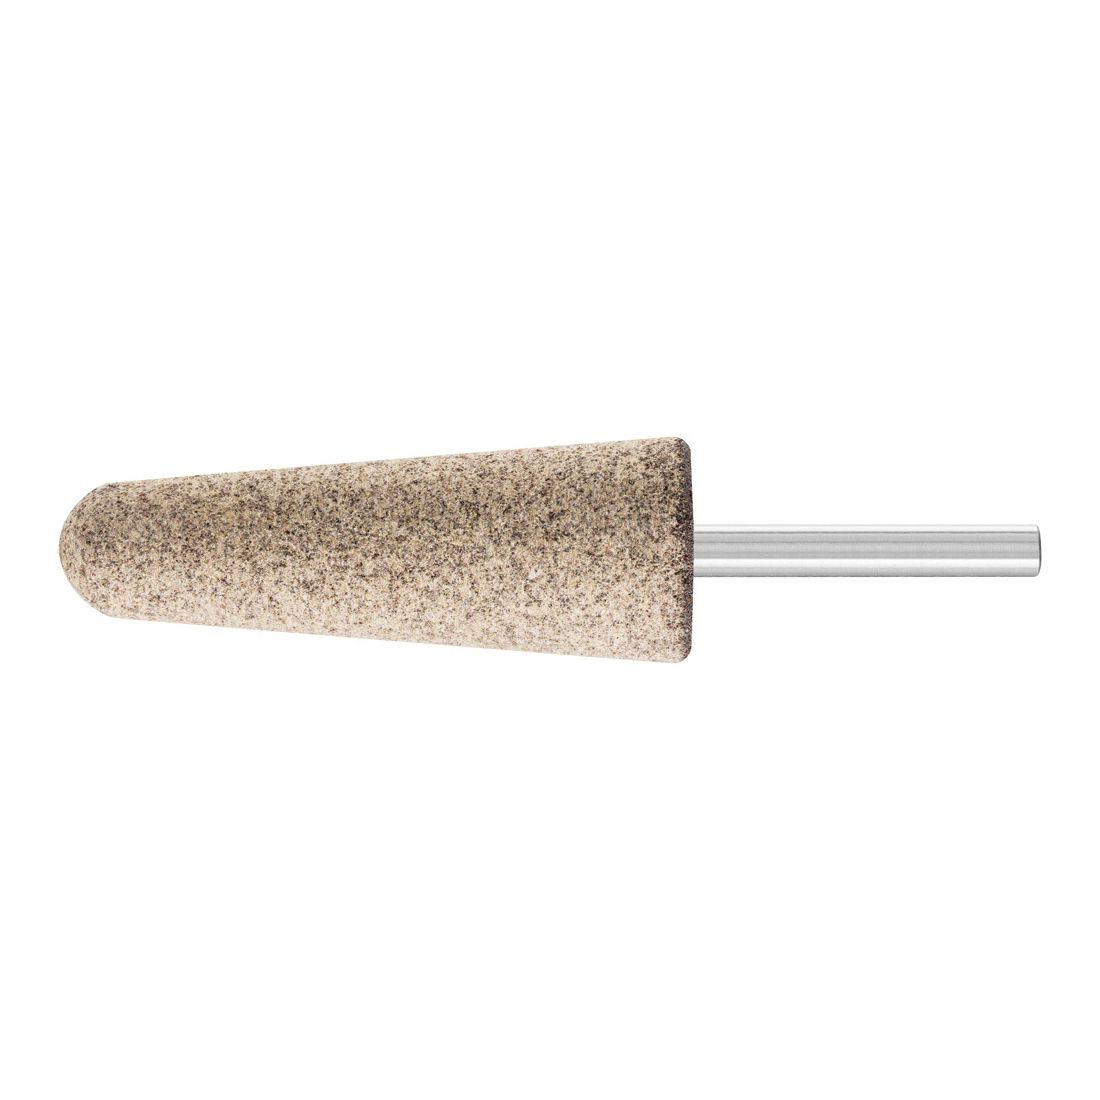 PFERD 35104 A Series Mounted Point, A3 Point, 1 in Dia x 2-3/4 in L Head, 1/4 in Dia Shank